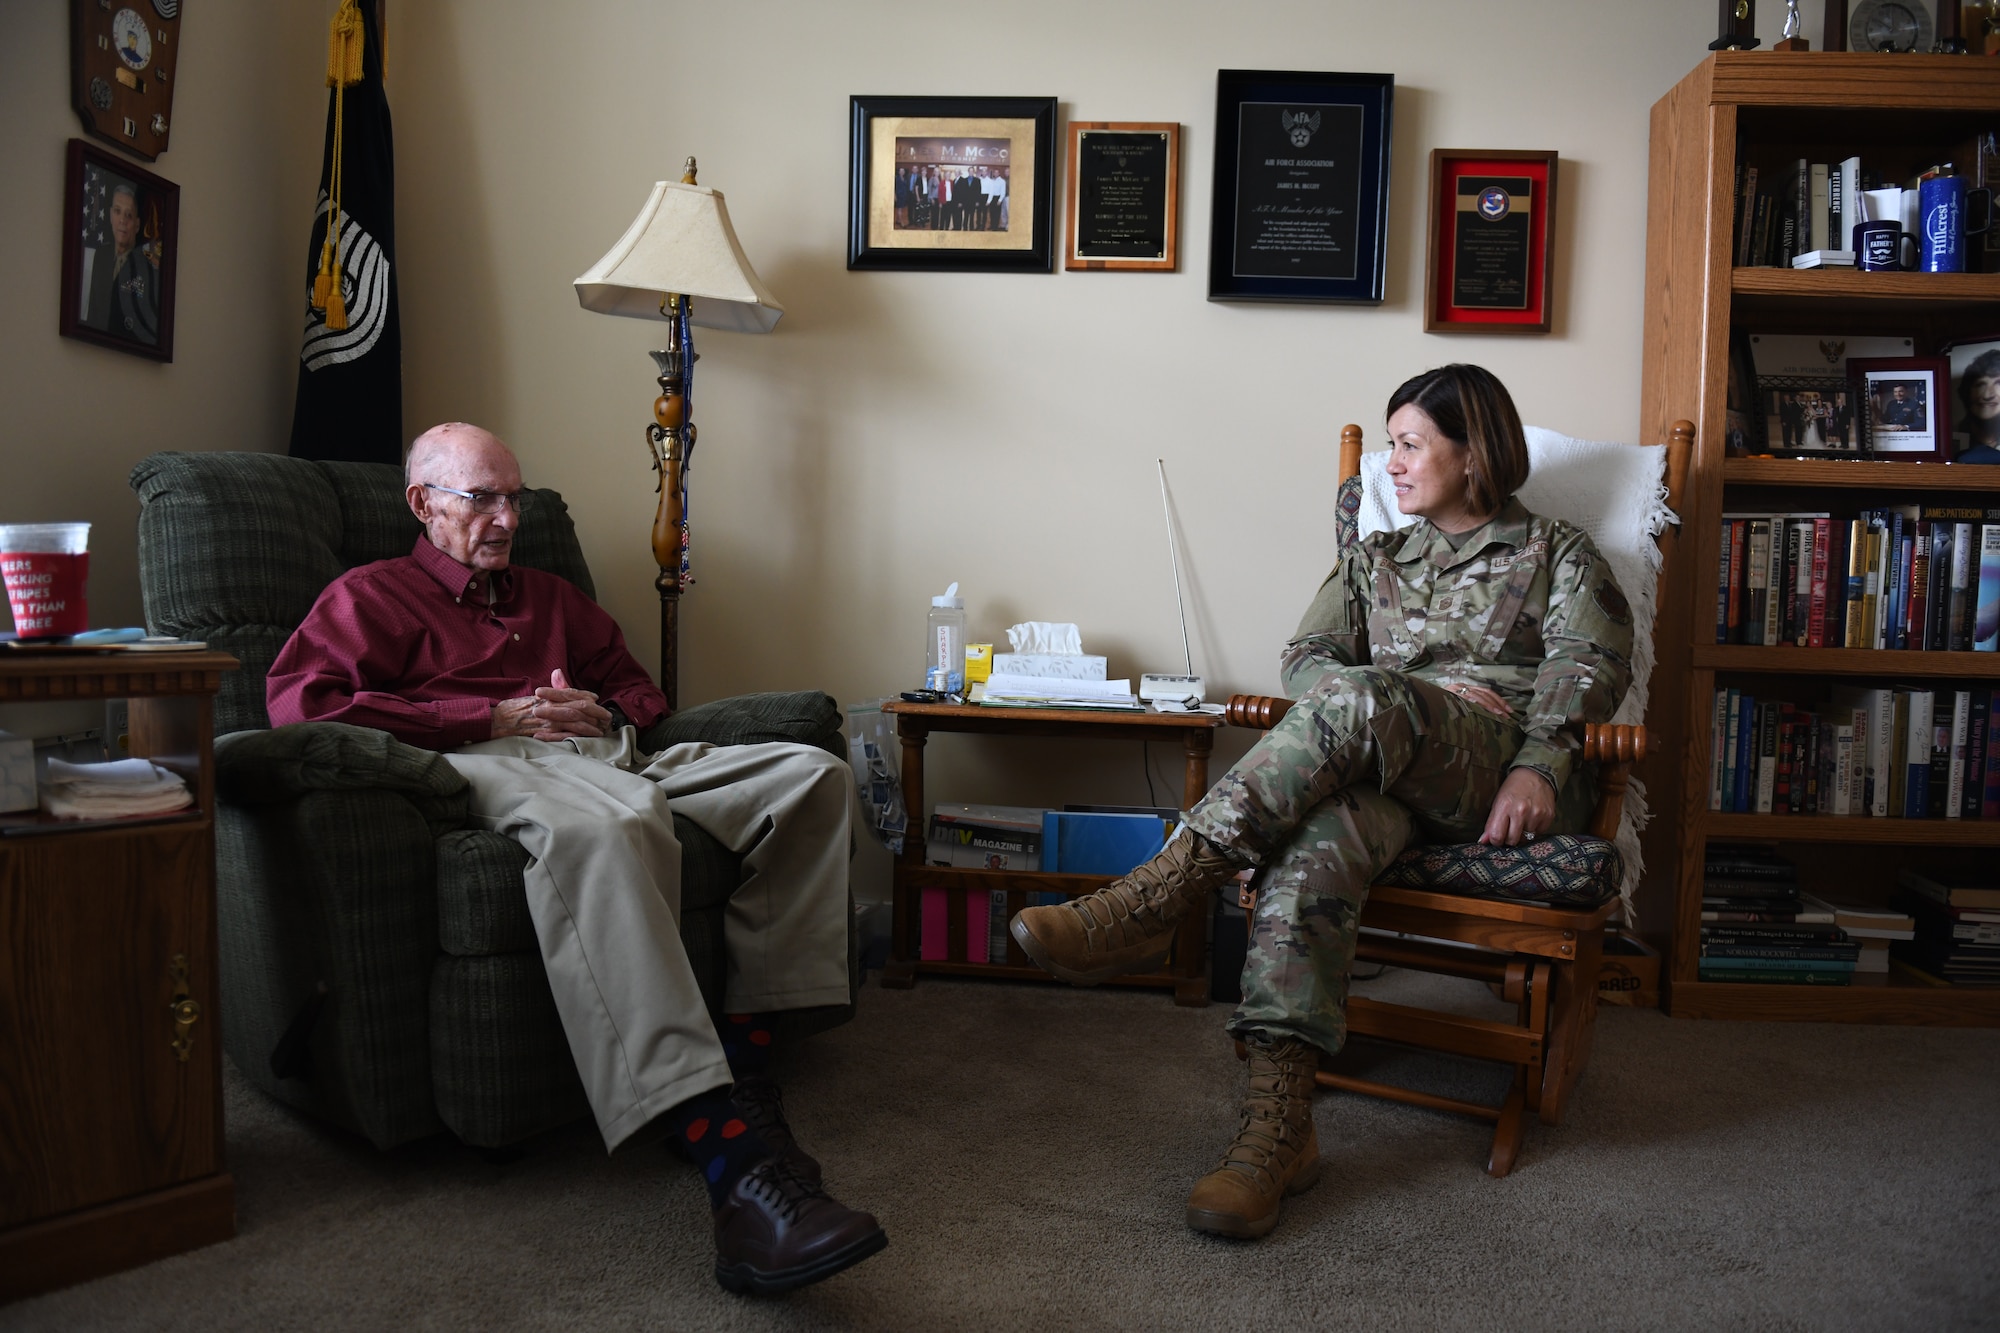 Retired Chief Master Sergeant of the Air Force James McCoy sits on the left in a recliner, and Chief Master Master Sergeant of the Air Force JoAnne S. Bass sits on the right in a wooden rocking chair facing each other in an office filled with awards on the wall, a bookshelf, a lamp and a flag.